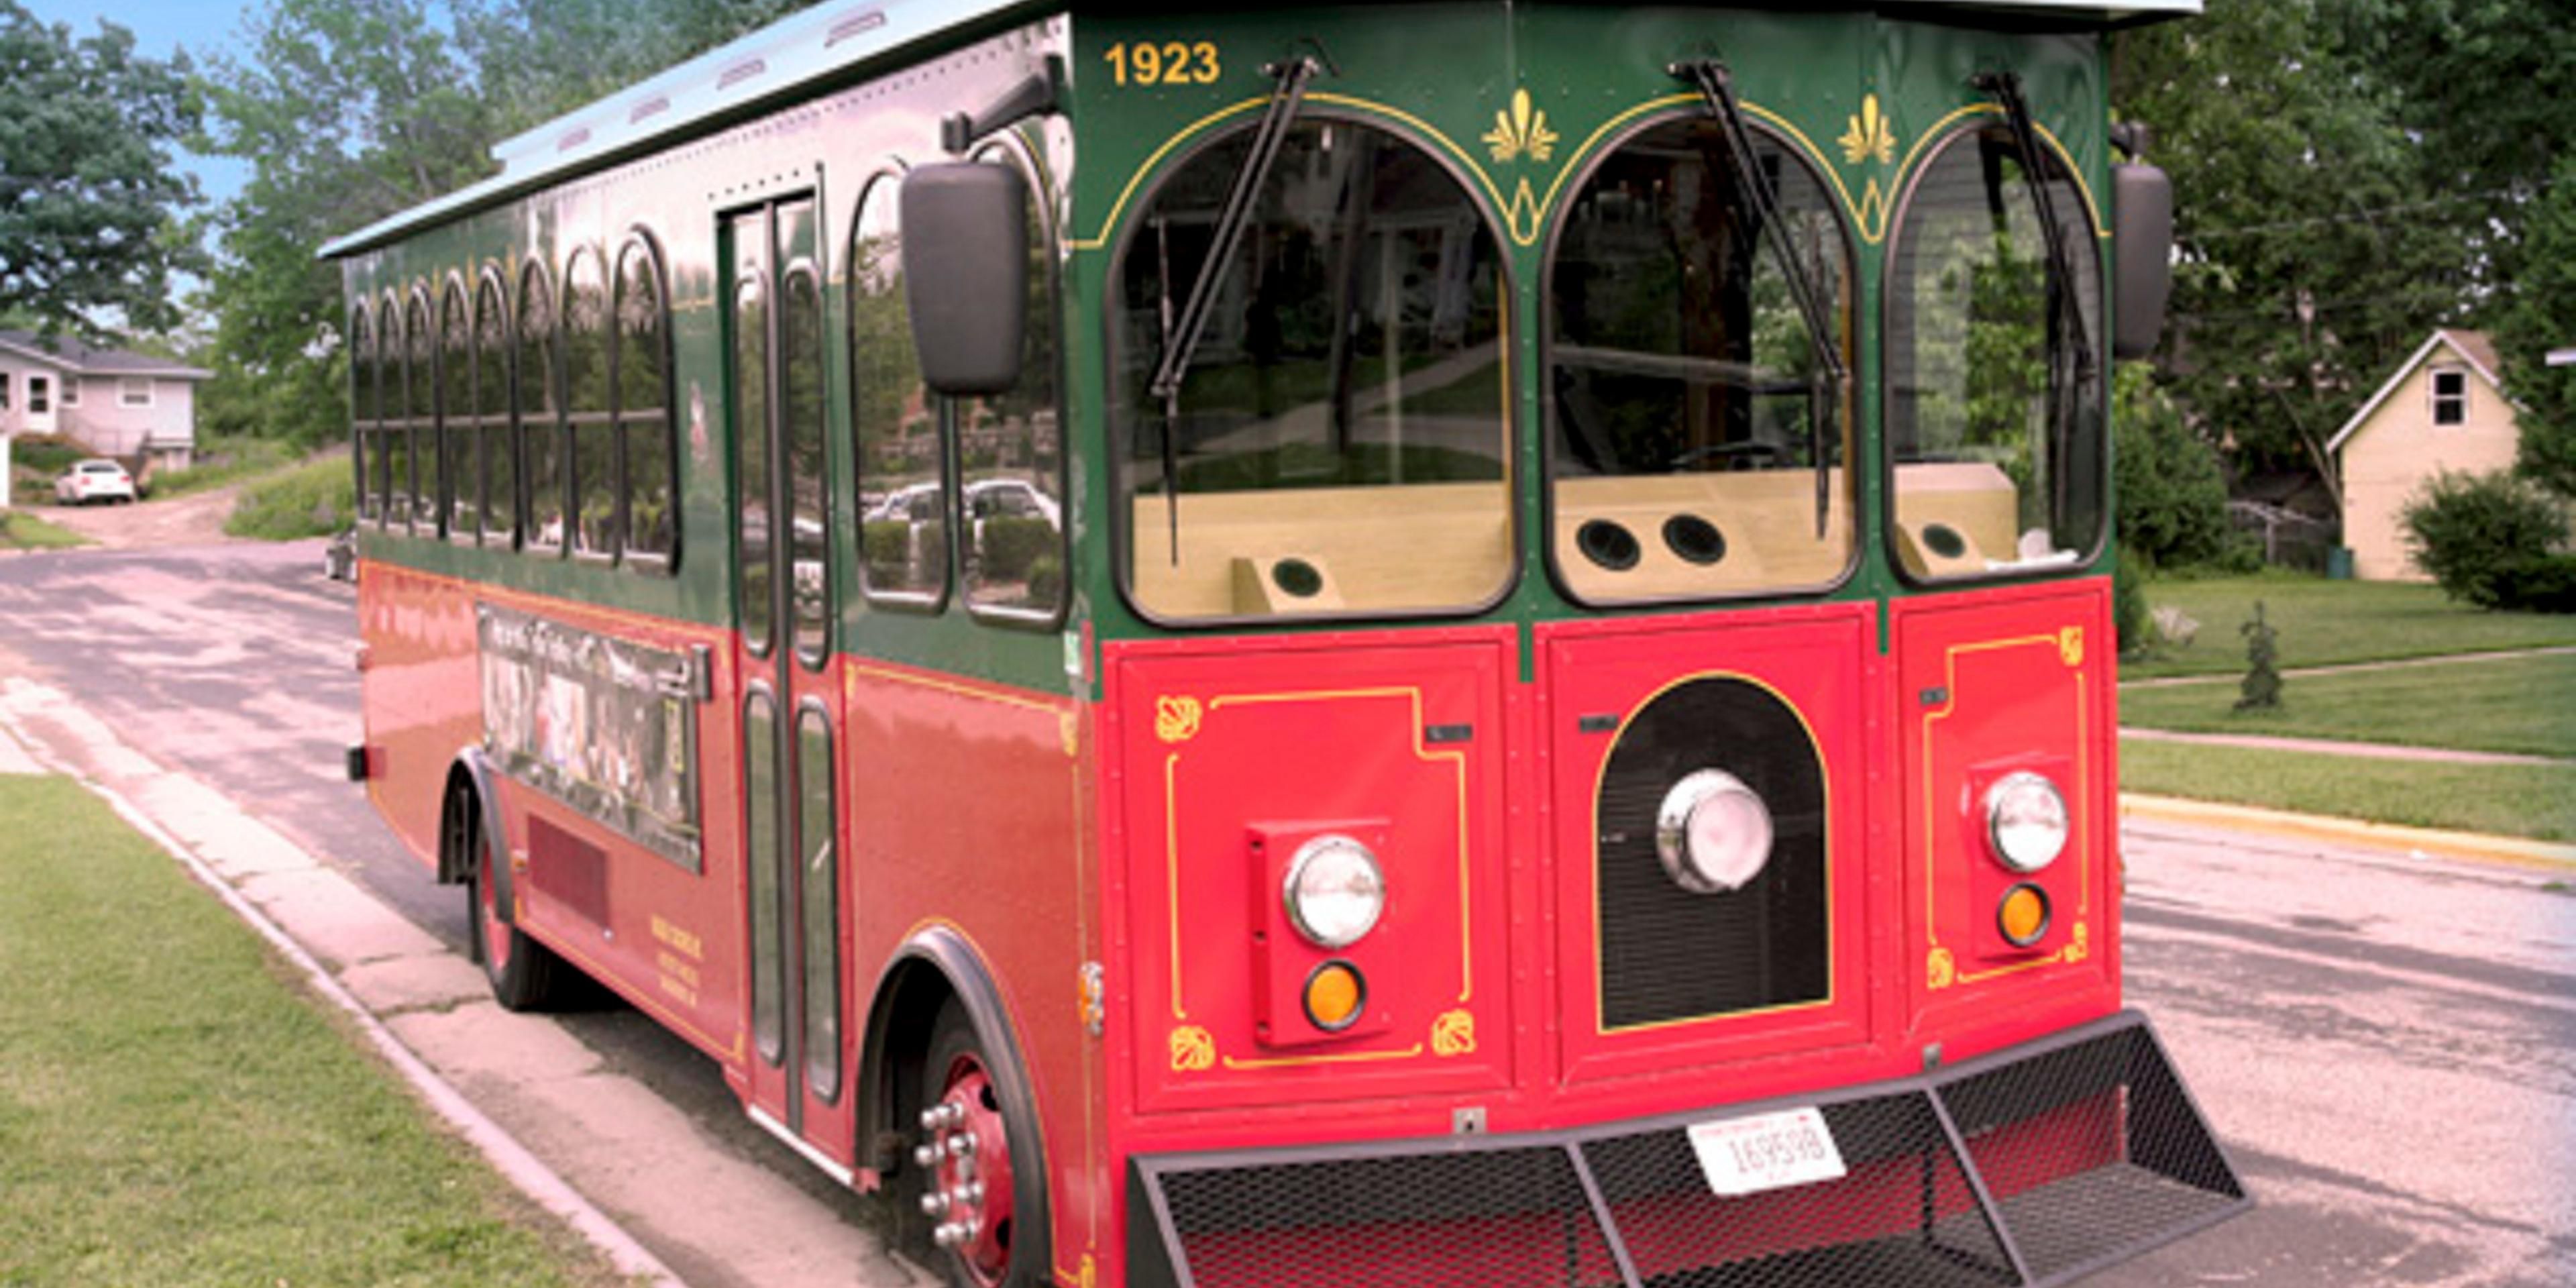 If you are looking for something to do during your stay, check out the City of Middleton's local trolley. They even pick you up right at the hotel! For more information, ask your desk agent or check out the guides in the lobby!